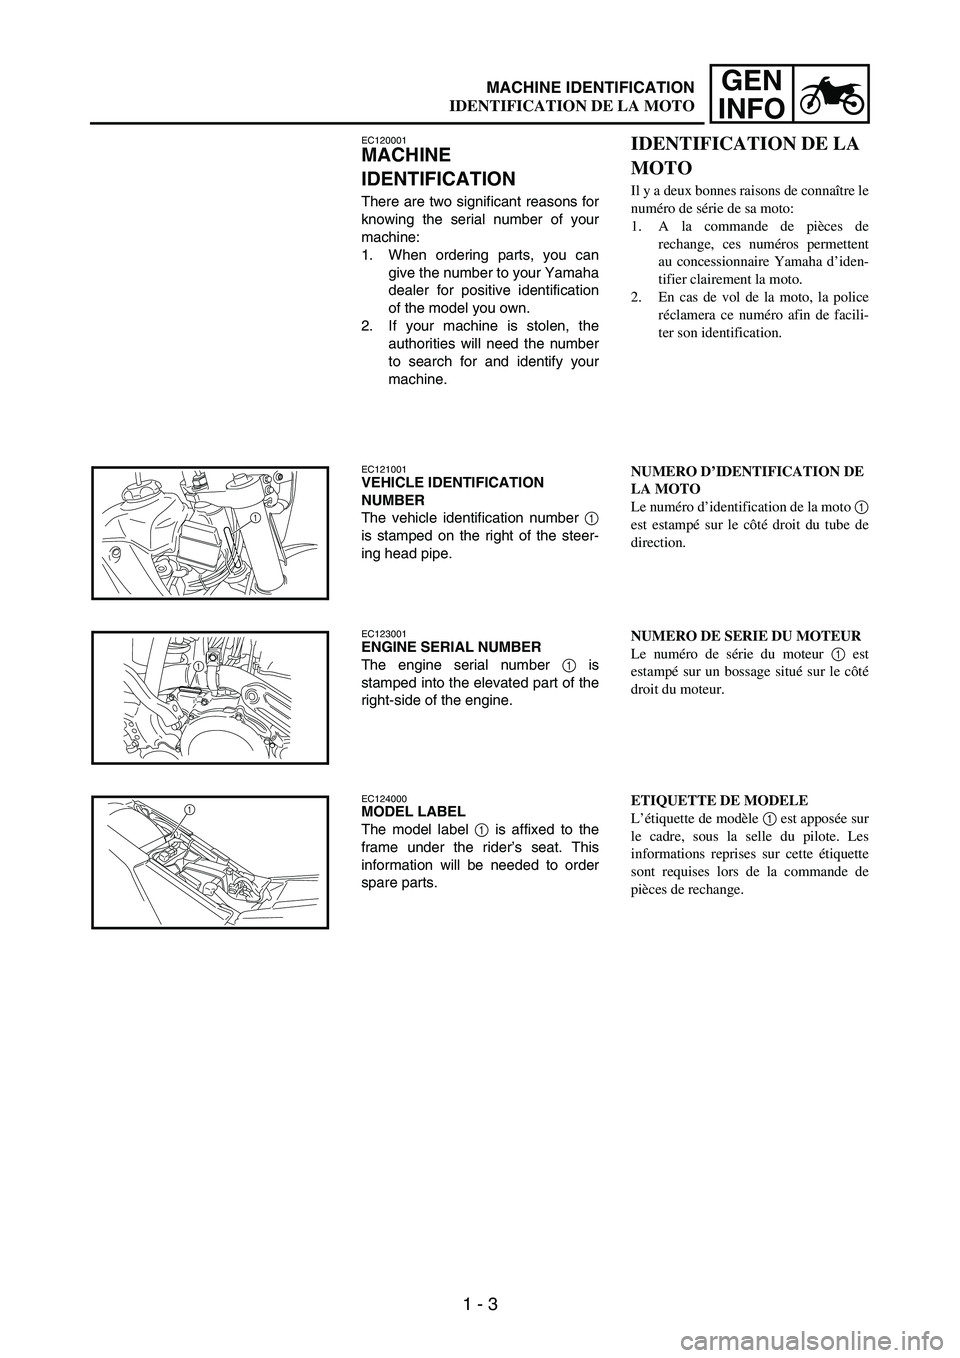 YAMAHA WR 250F 2005  Notices Demploi (in French) 1 - 3
GEN
INFOMACHINE IDENTIFICATION
EC120001
MACHINE 
IDENTIFICATION
There are two significant reasons for
knowing the serial number of your
machine:
1. When ordering parts, you can
give the number t